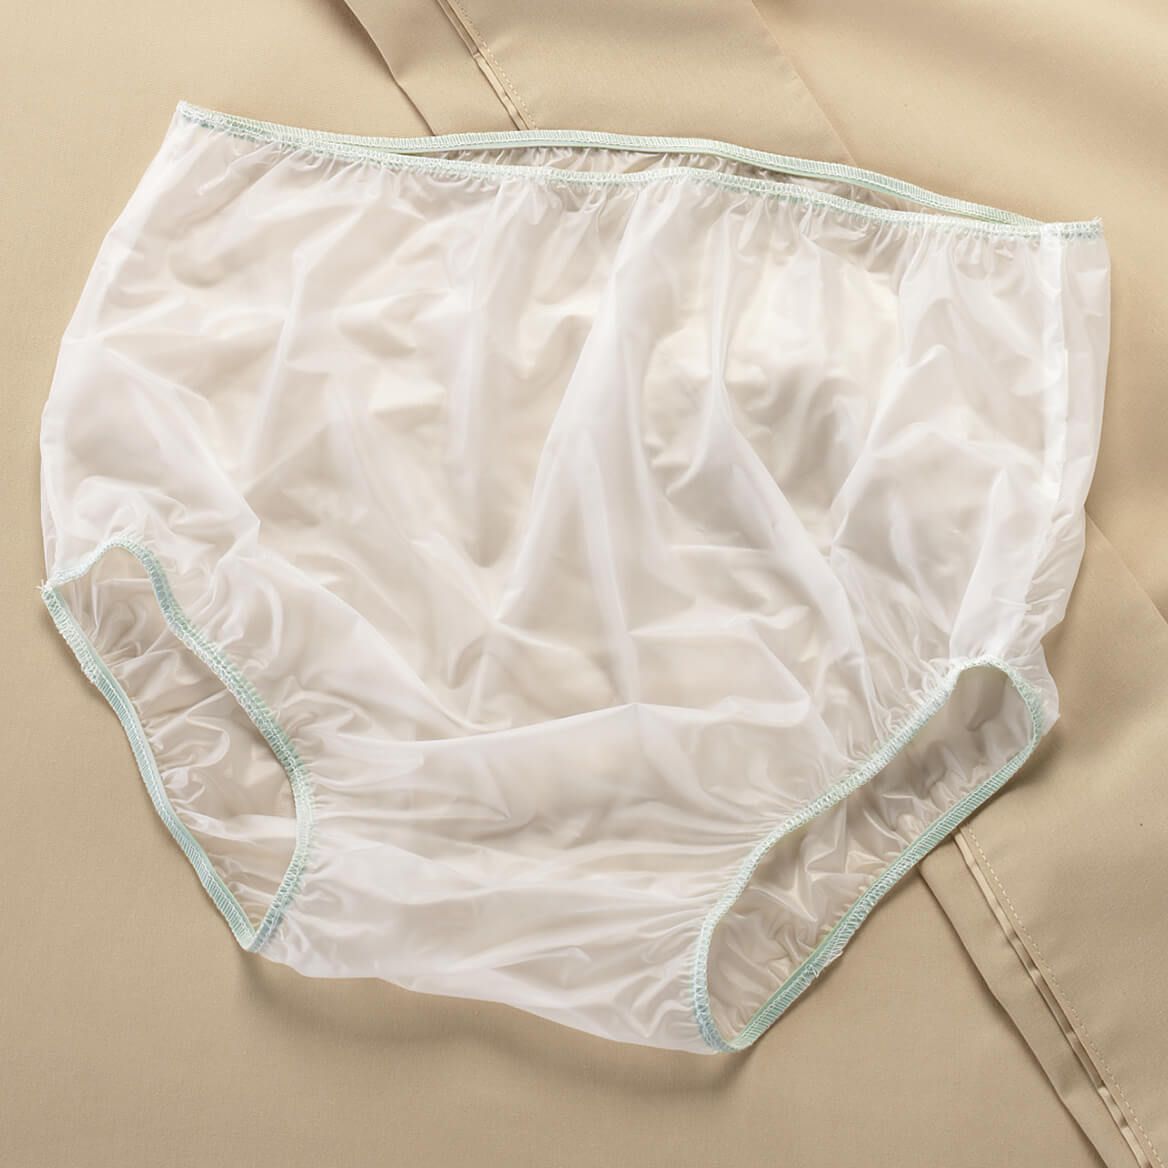 Vinyl Waterproof Pull-On-Cover Incontinence Pants (This Is Not a